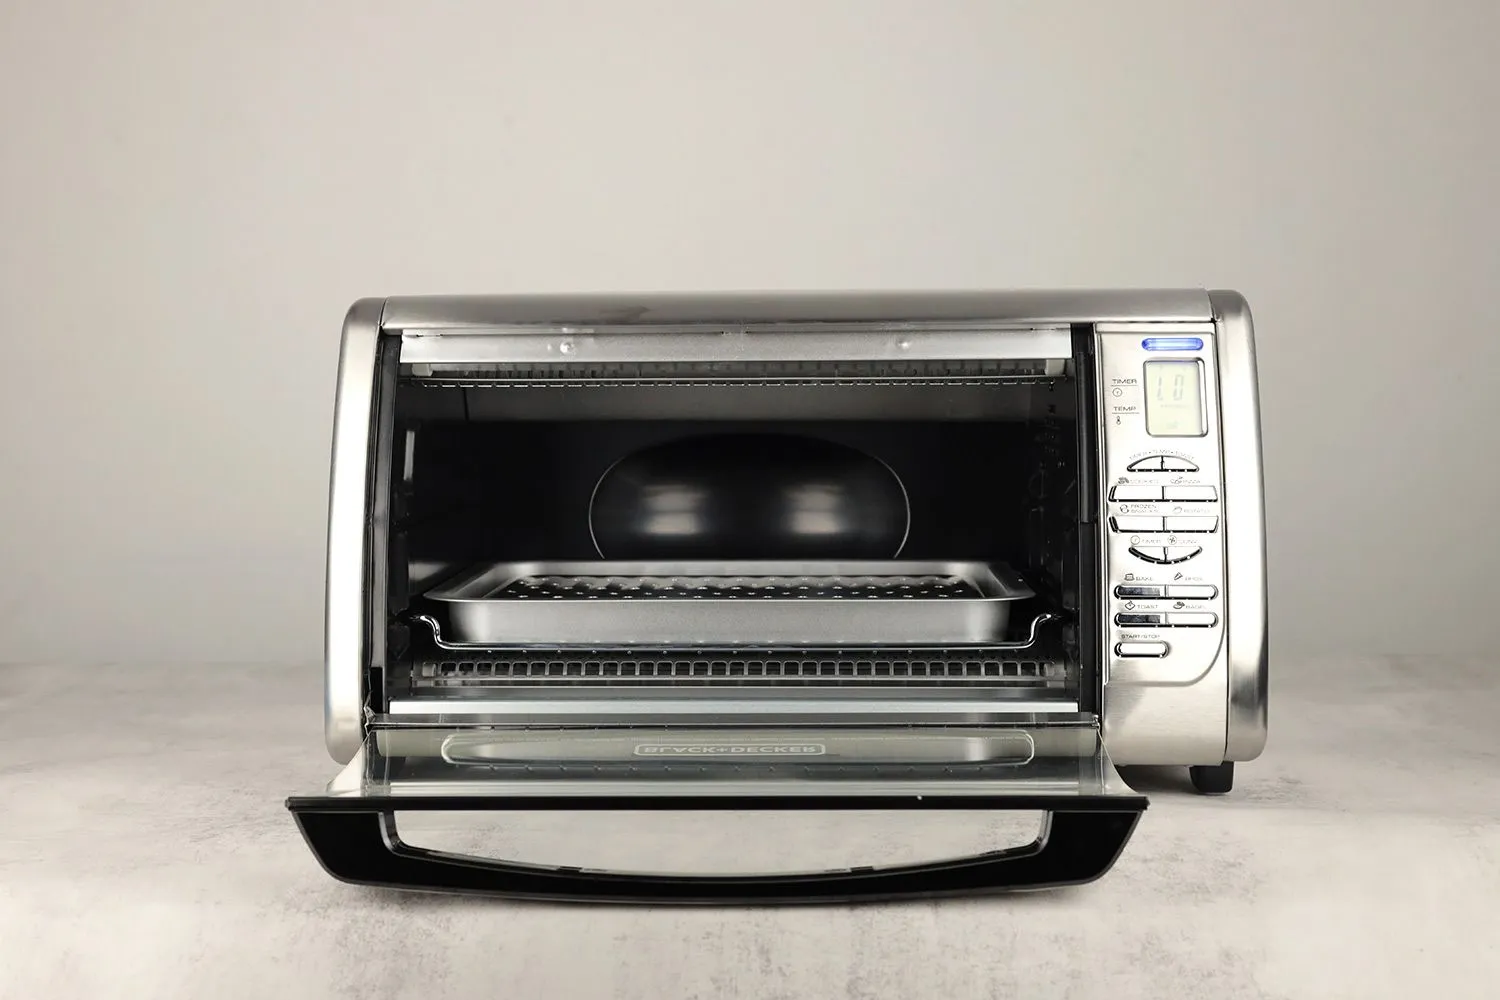 Black+Decker CTO6335SS Toaster & Toaster Oven Review - Consumer Reports